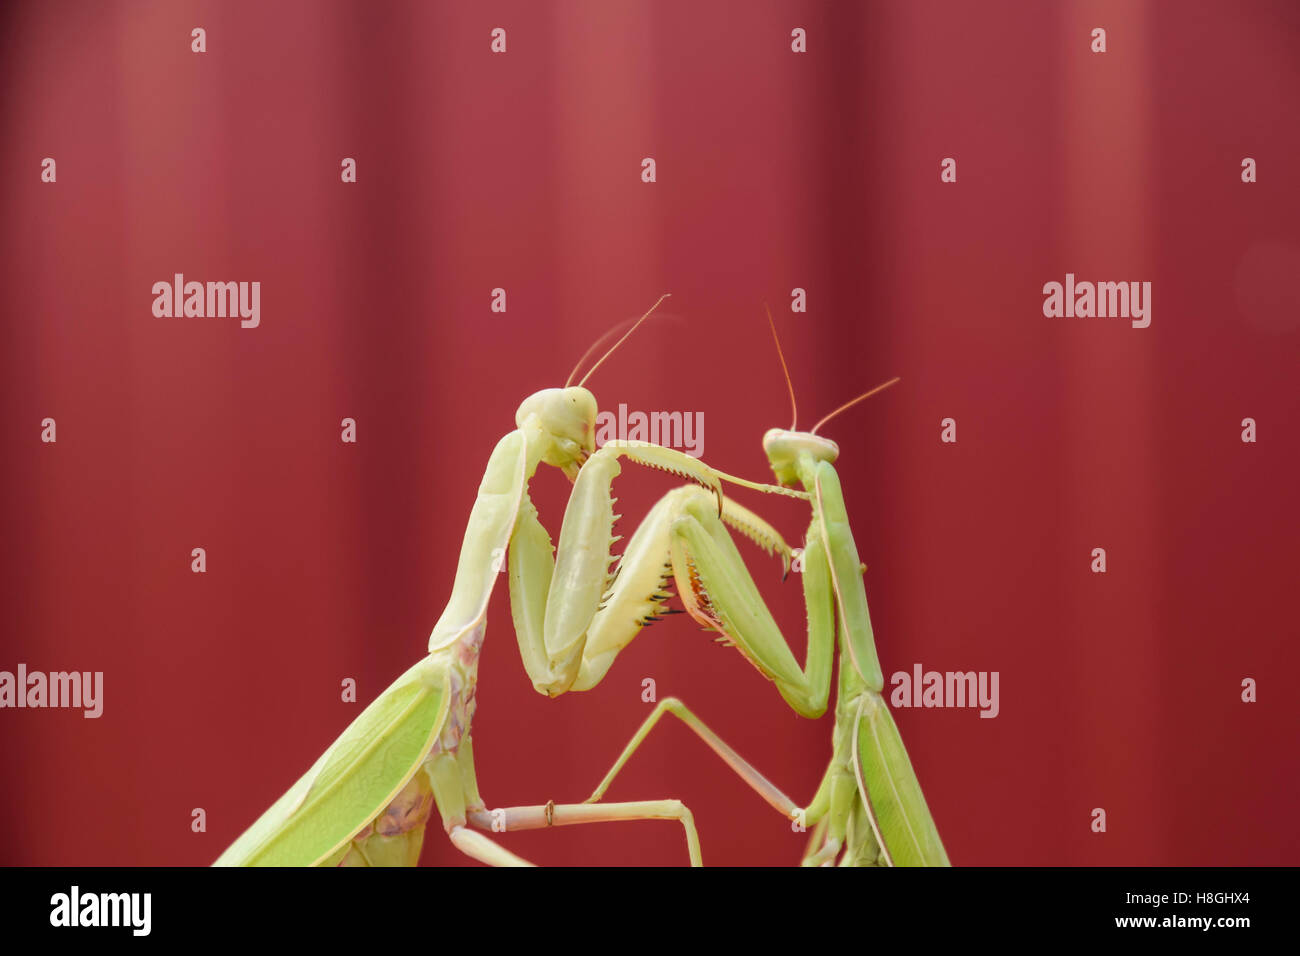 Mantis on a red background. Mating mantises. Mantis insect predator Stock Photo